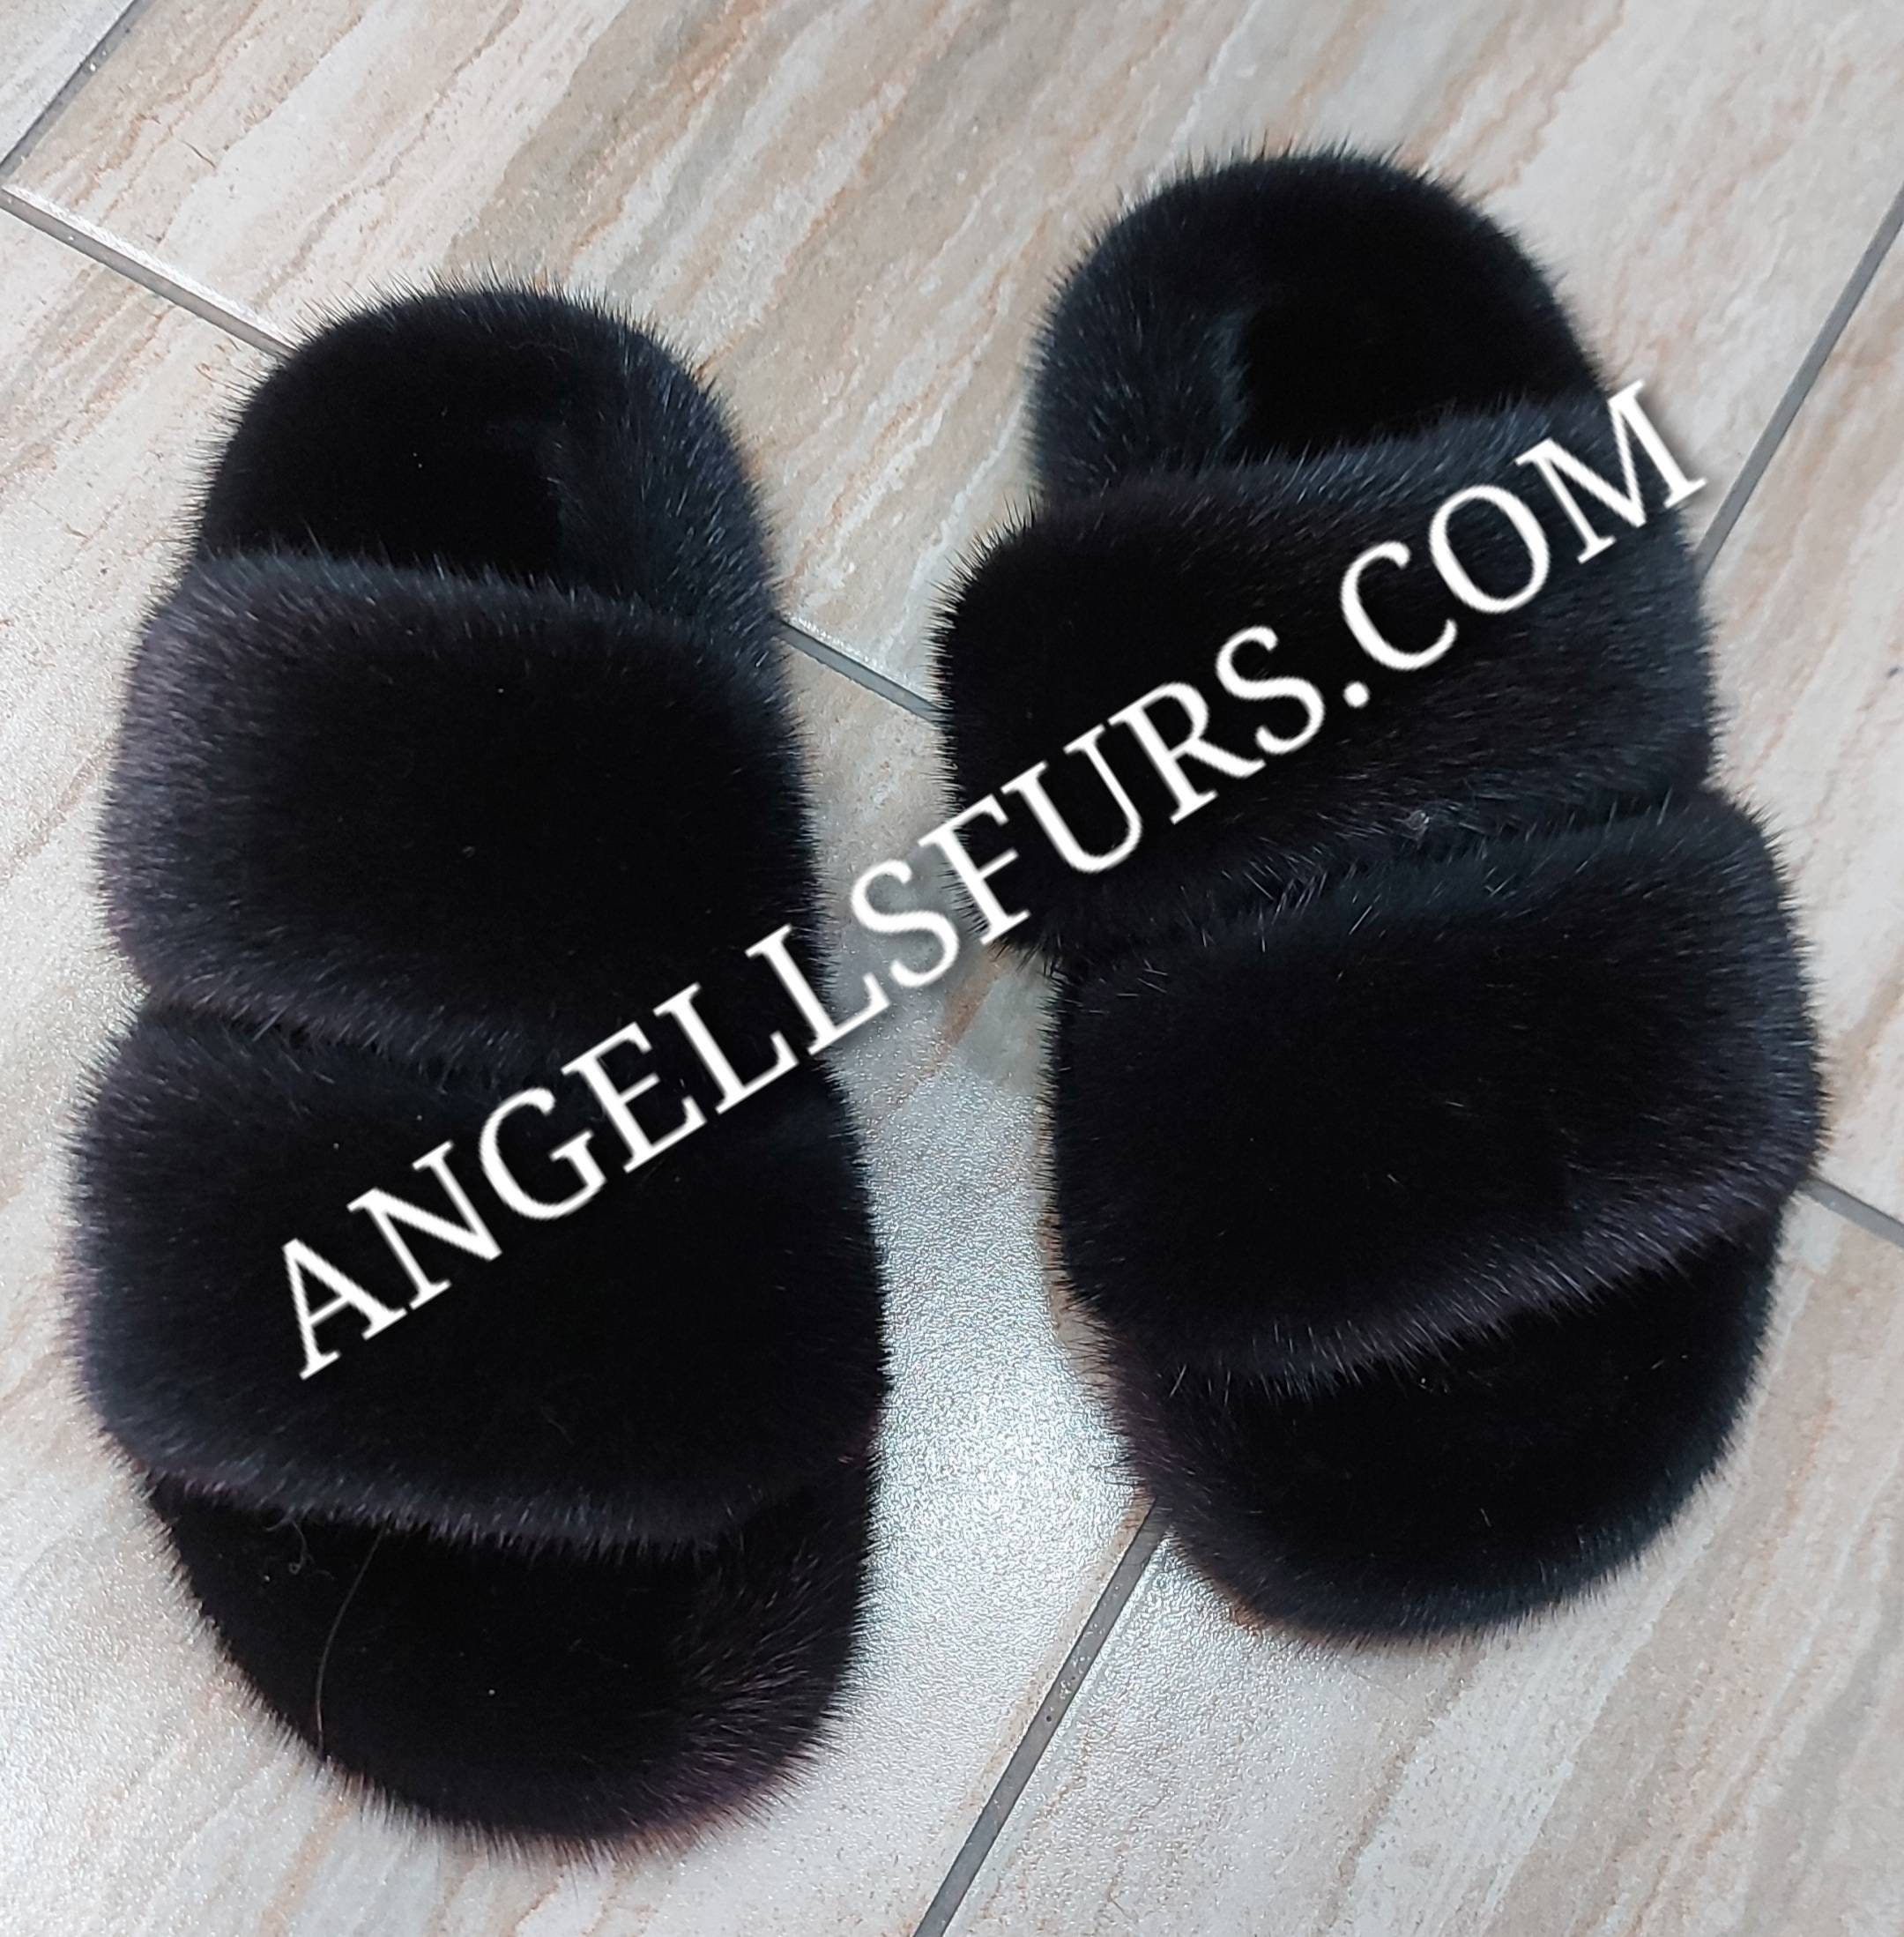 Mink Fur Flat Women Home Slippers With Fur, Soft Suite Flat Mules Dreamy  Slippers For Women Brown Pink Black Homey Shoes From Fashion_company, $2.02